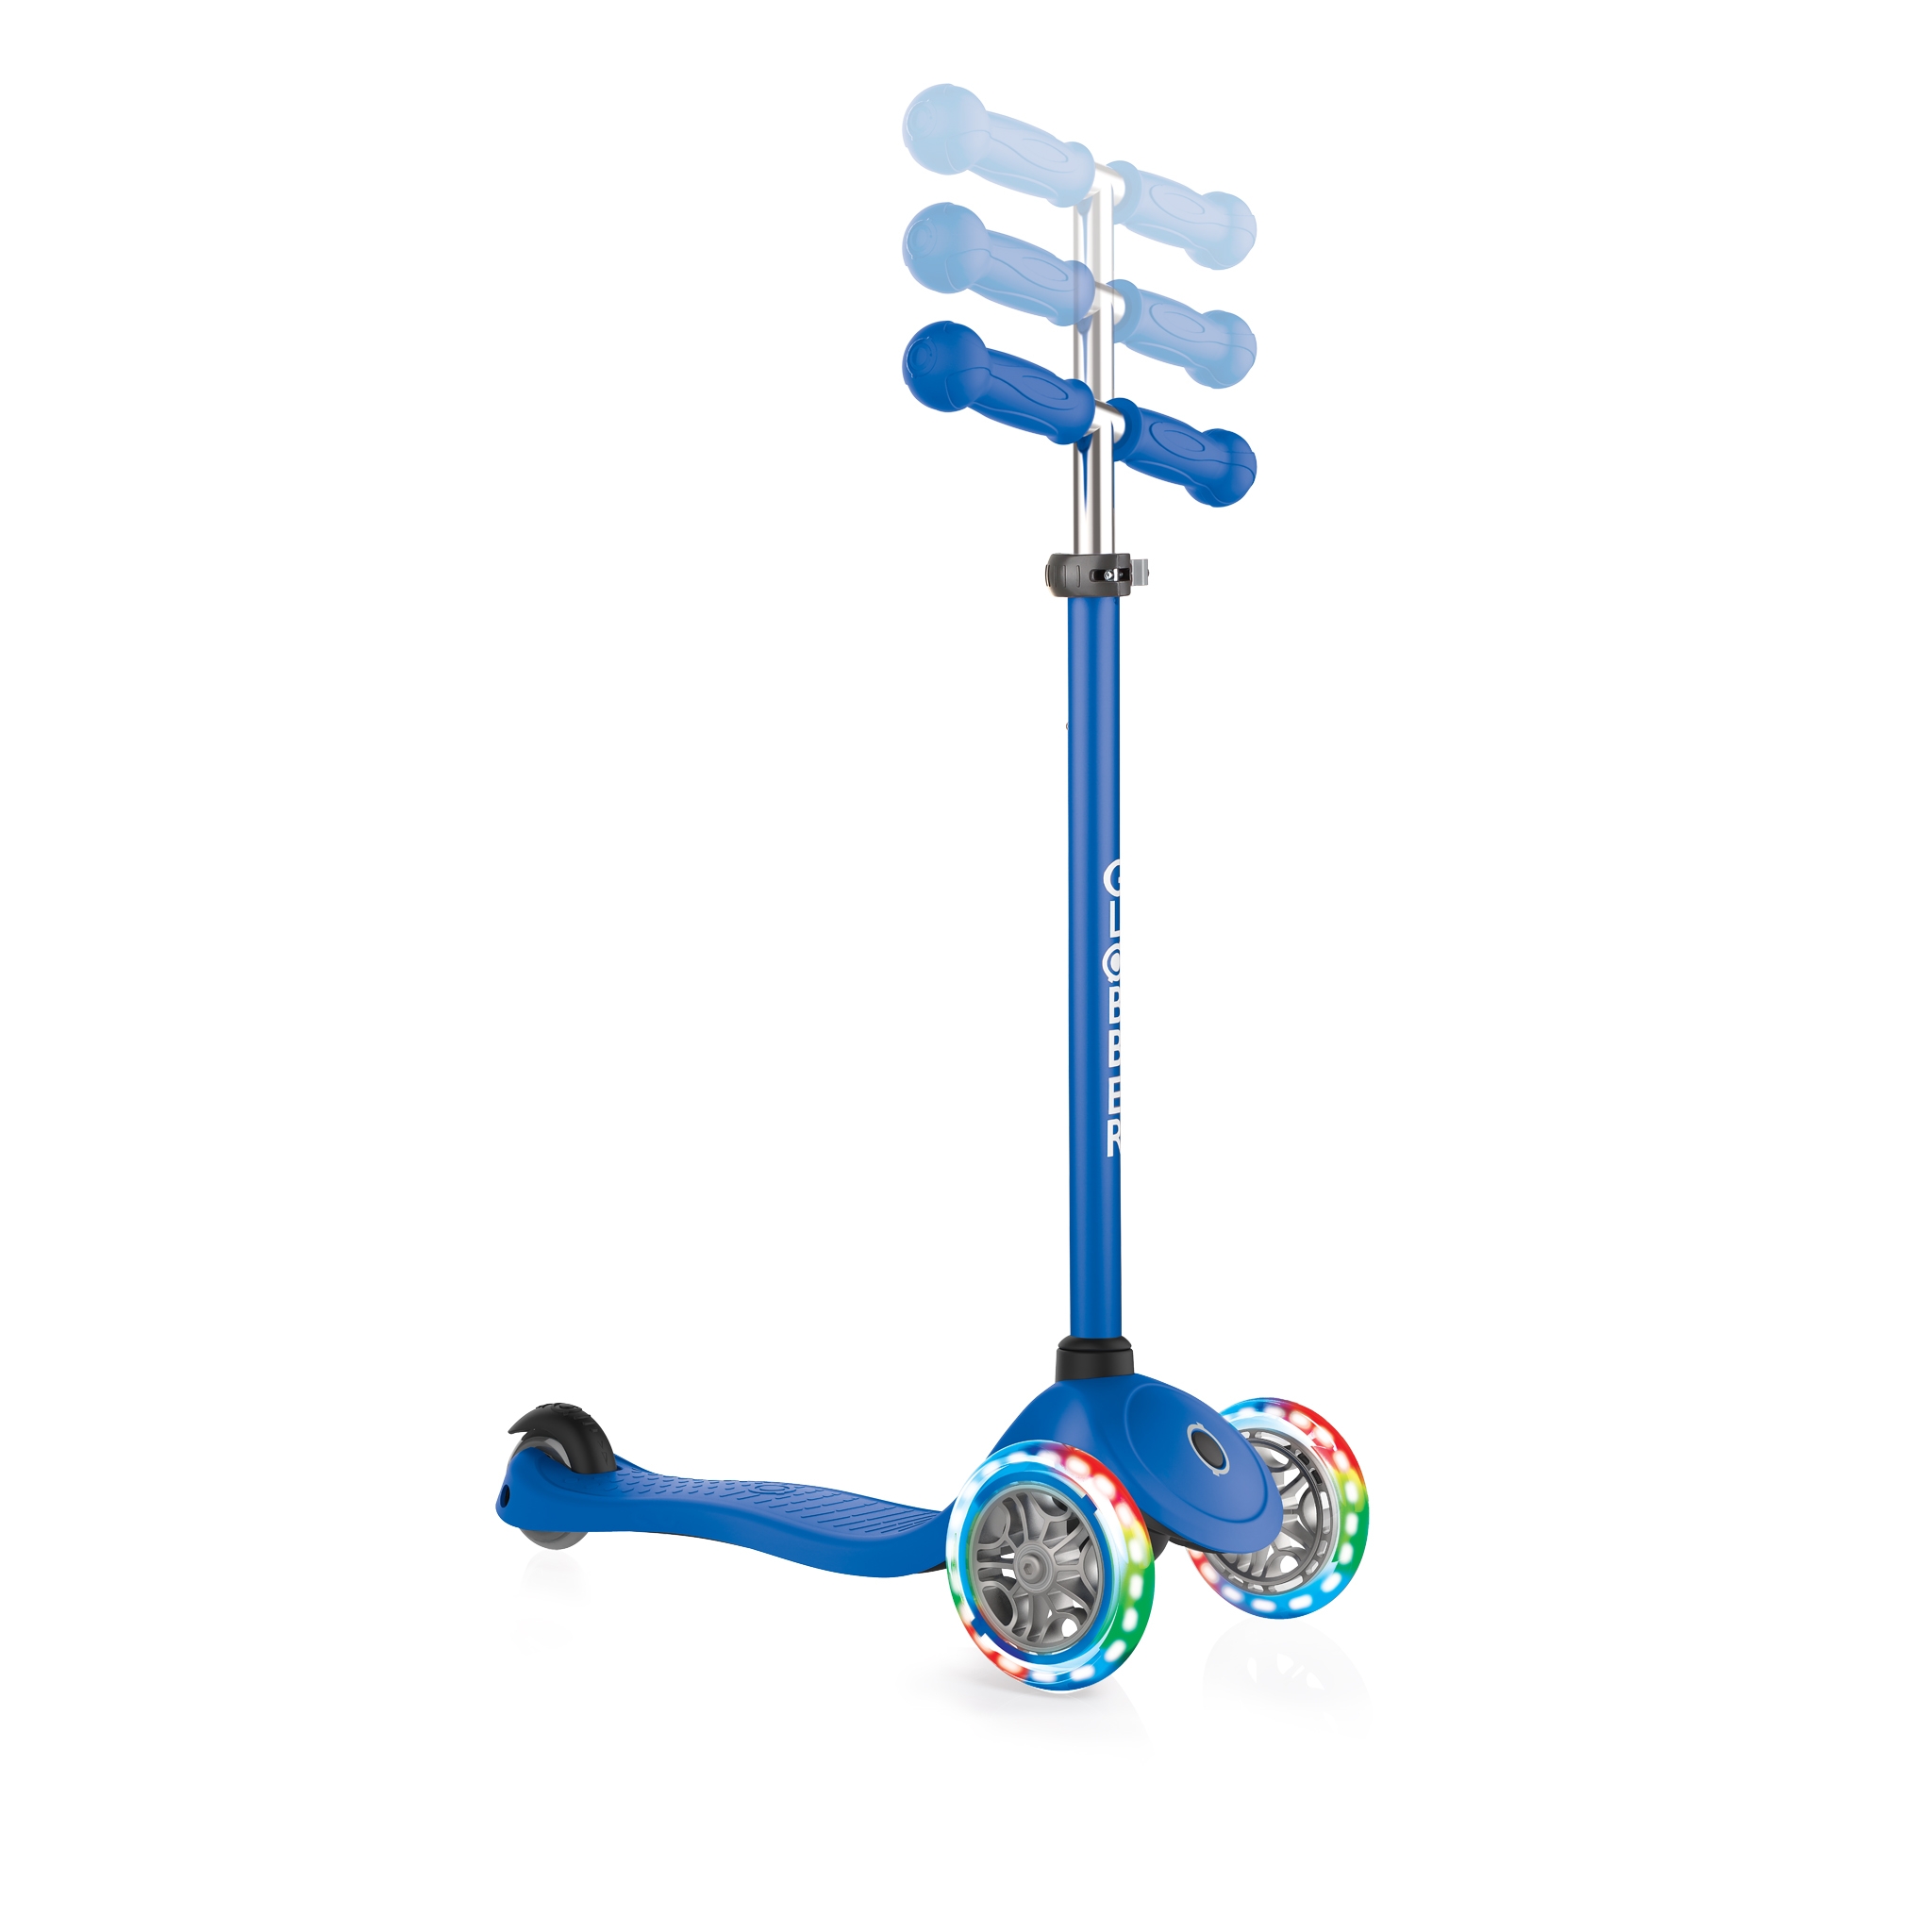 PRIMO-LIGHTS-3-wheel-scooter-for-kids-with-3-height-adjustable-T-bar_navy-blue.jpg. 2